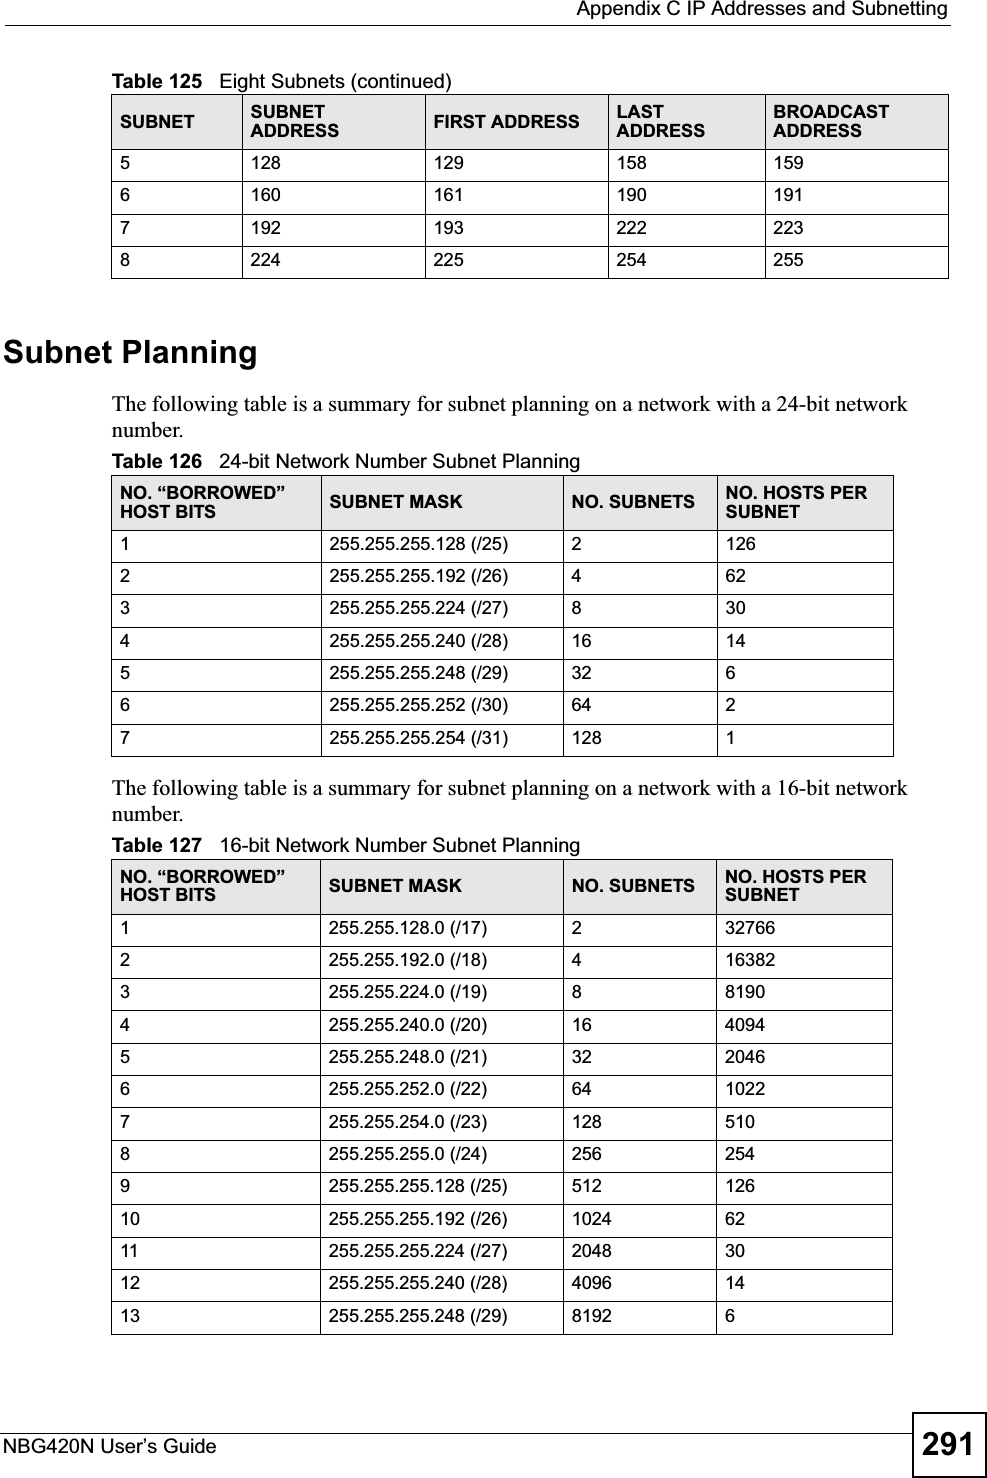  Appendix C IP Addresses and SubnettingNBG420N User’s Guide 291Subnet PlanningThe following table is a summary for subnet planning on a network with a 24-bit network number.The following table is a summary for subnet planning on a network with a 16-bit network number. 5128 129 158 1596160 161 190 1917192 193 222 2238224 225 254 255Table 125   Eight Subnets (continued)SUBNET SUBNETADDRESS FIRST ADDRESS LAST ADDRESSBROADCAST ADDRESSTable 126   24-bit Network Number Subnet PlanningNO. “BORROWED” HOST BITS SUBNET MASK NO. SUBNETS NO. HOSTS PER SUBNET1255.255.255.128 (/25) 21262255.255.255.192 (/26) 4623255.255.255.224 (/27) 8304255.255.255.240 (/28) 16 145255.255.255.248 (/29) 32 66255.255.255.252 (/30) 64 27255.255.255.254 (/31) 128 1Table 127   16-bit Network Number Subnet PlanningNO. “BORROWED” HOST BITS SUBNET MASK NO. SUBNETS NO. HOSTS PER SUBNET1255.255.128.0 (/17) 2327662255.255.192.0 (/18) 4163823255.255.224.0 (/19) 881904255.255.240.0 (/20) 16 40945255.255.248.0 (/21) 32 20466255.255.252.0 (/22) 64 10227255.255.254.0 (/23) 128 5108255.255.255.0 (/24) 256 2549255.255.255.128 (/25) 512 12610 255.255.255.192 (/26) 1024 6211 255.255.255.224 (/27) 2048 3012 255.255.255.240 (/28) 4096 1413 255.255.255.248 (/29) 8192 6